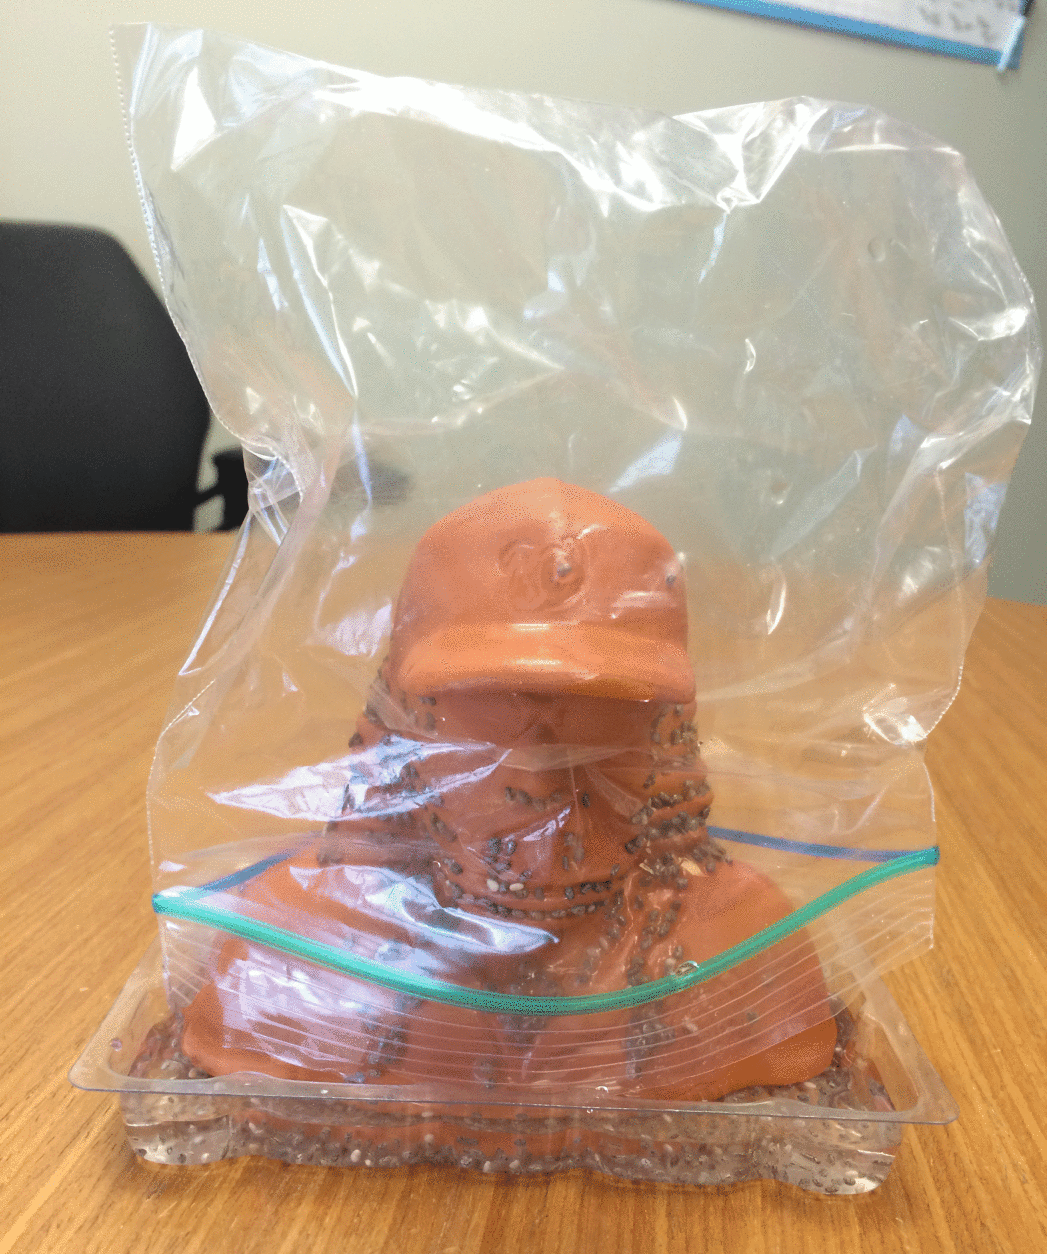 DAY 2: Testing a Chia Pet suggestion to create a little greenhouse with a sandwich bag. (WTOP/Sarah Beth Hensley)